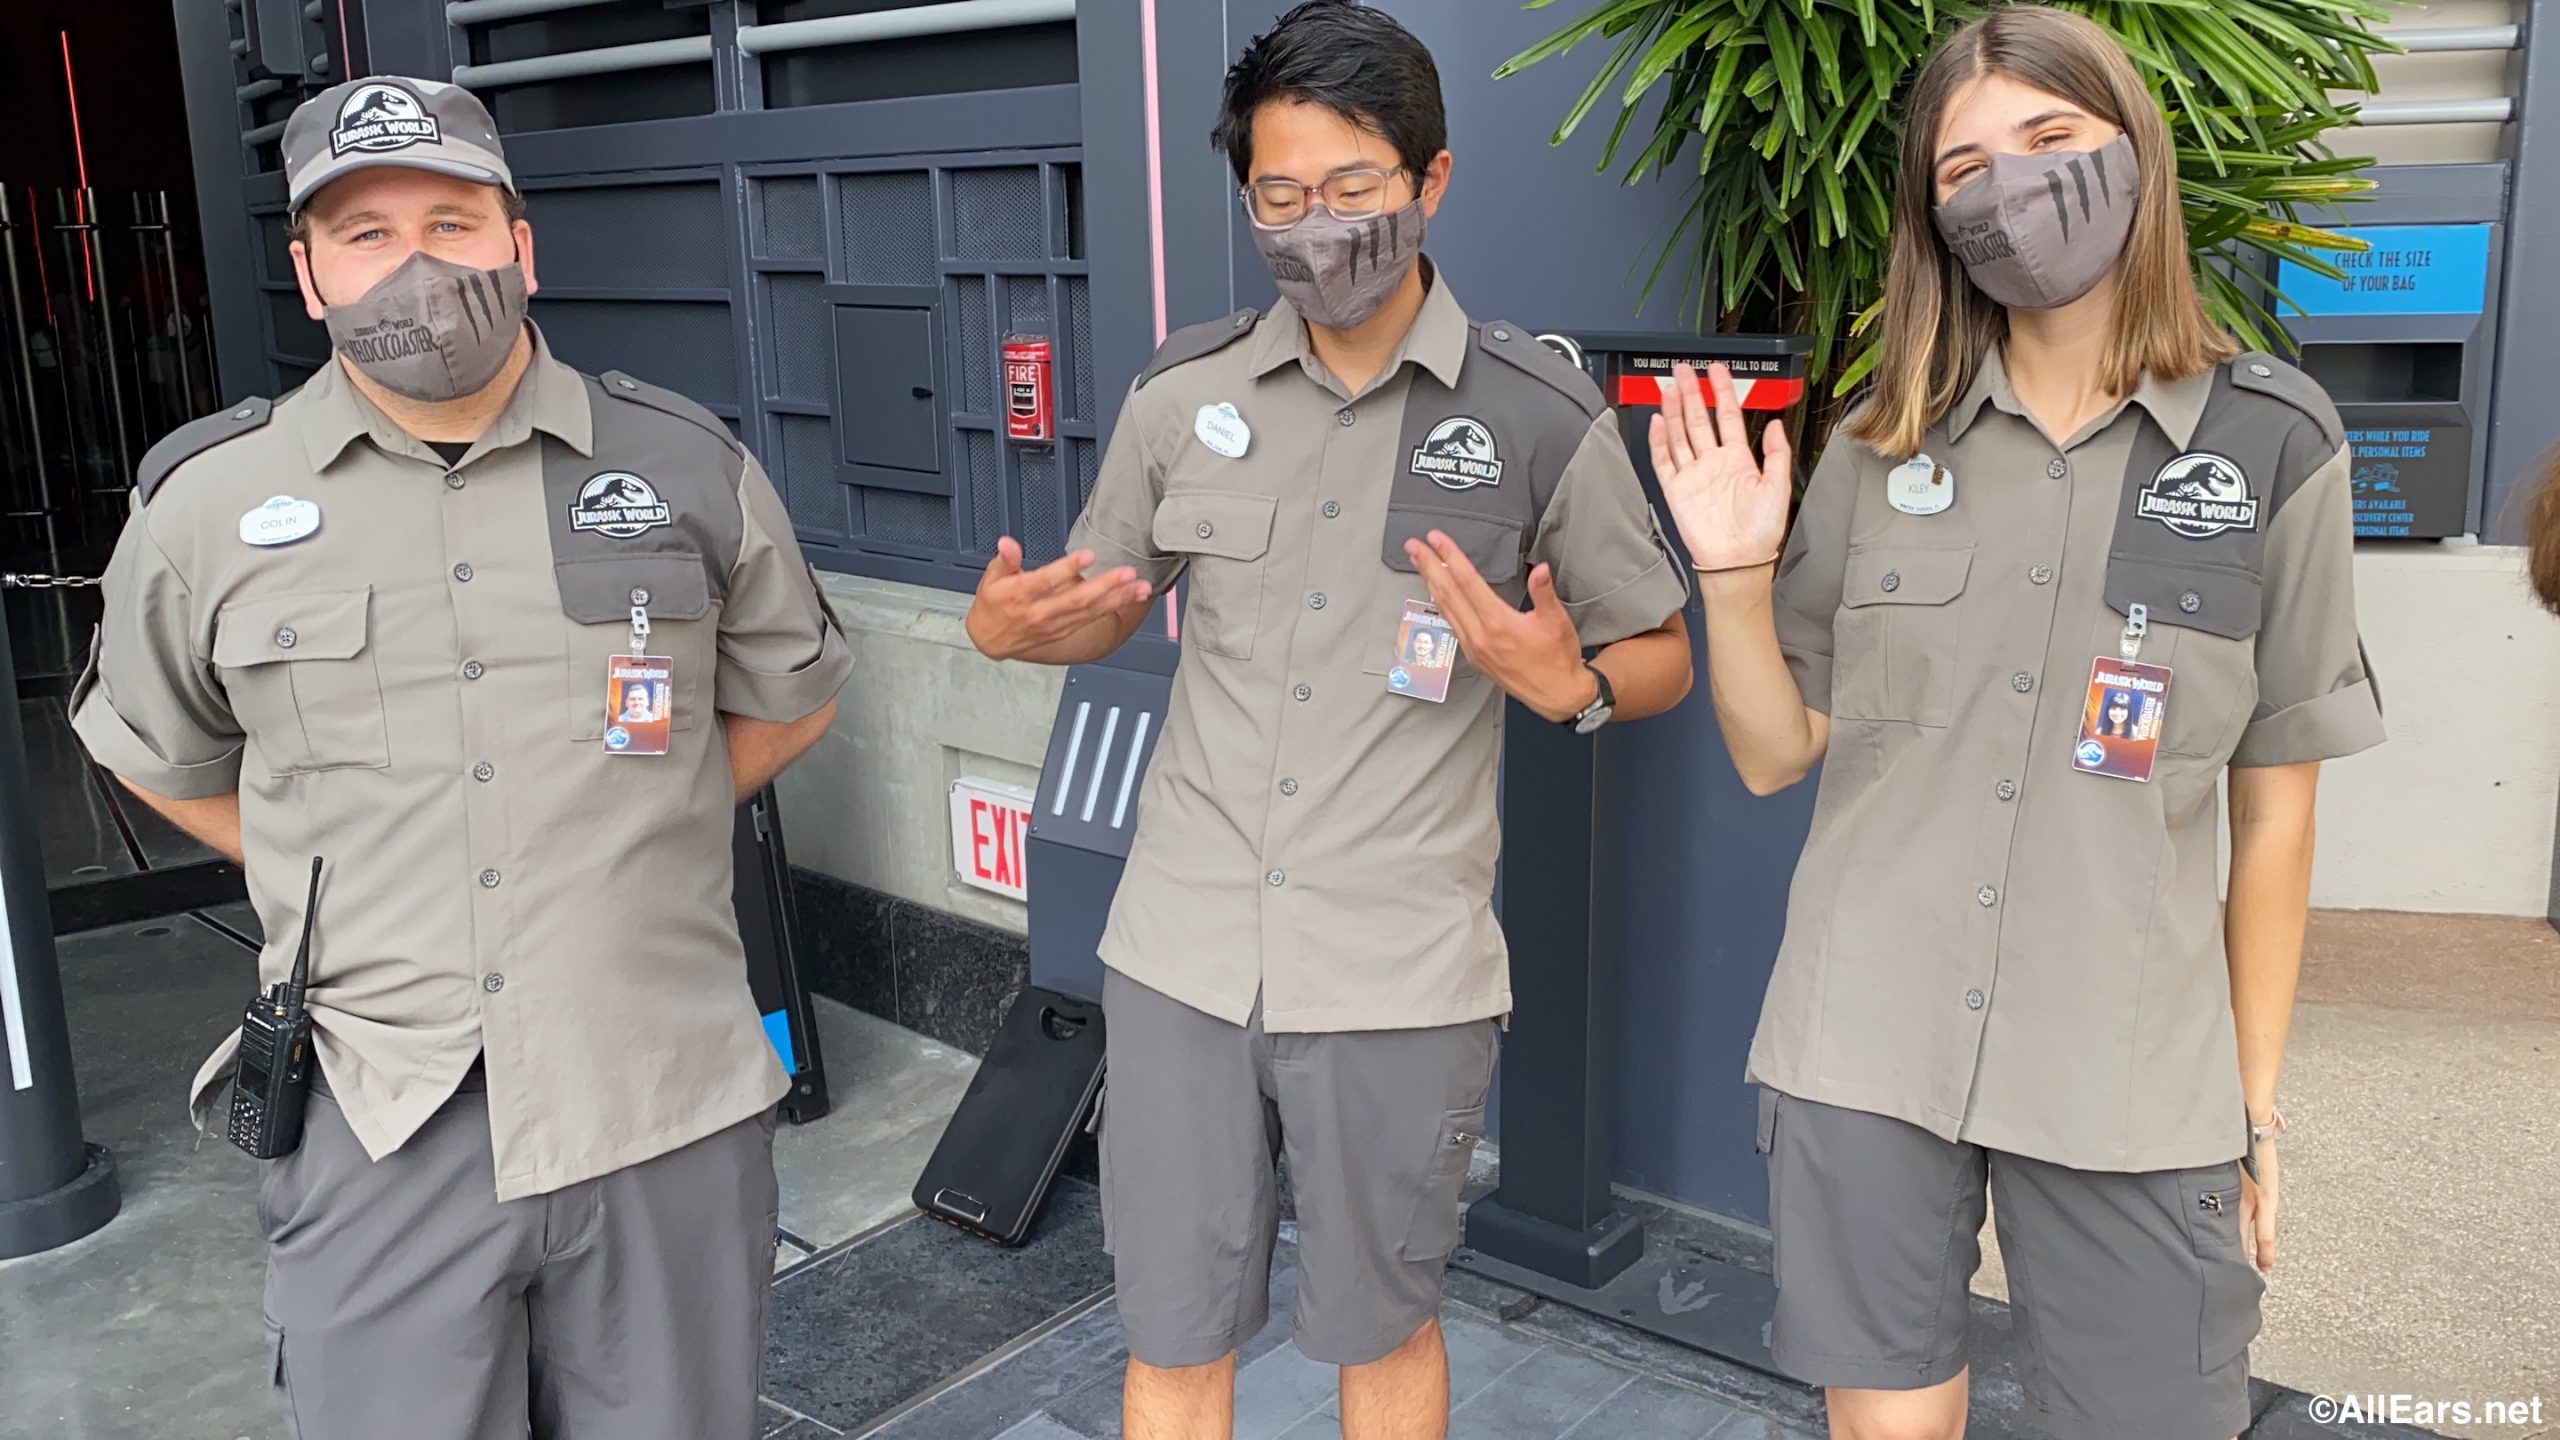 PHOTOS: Check Out the New VelociCoaster Team Member Costumes at Universal!  - AllEars.Net